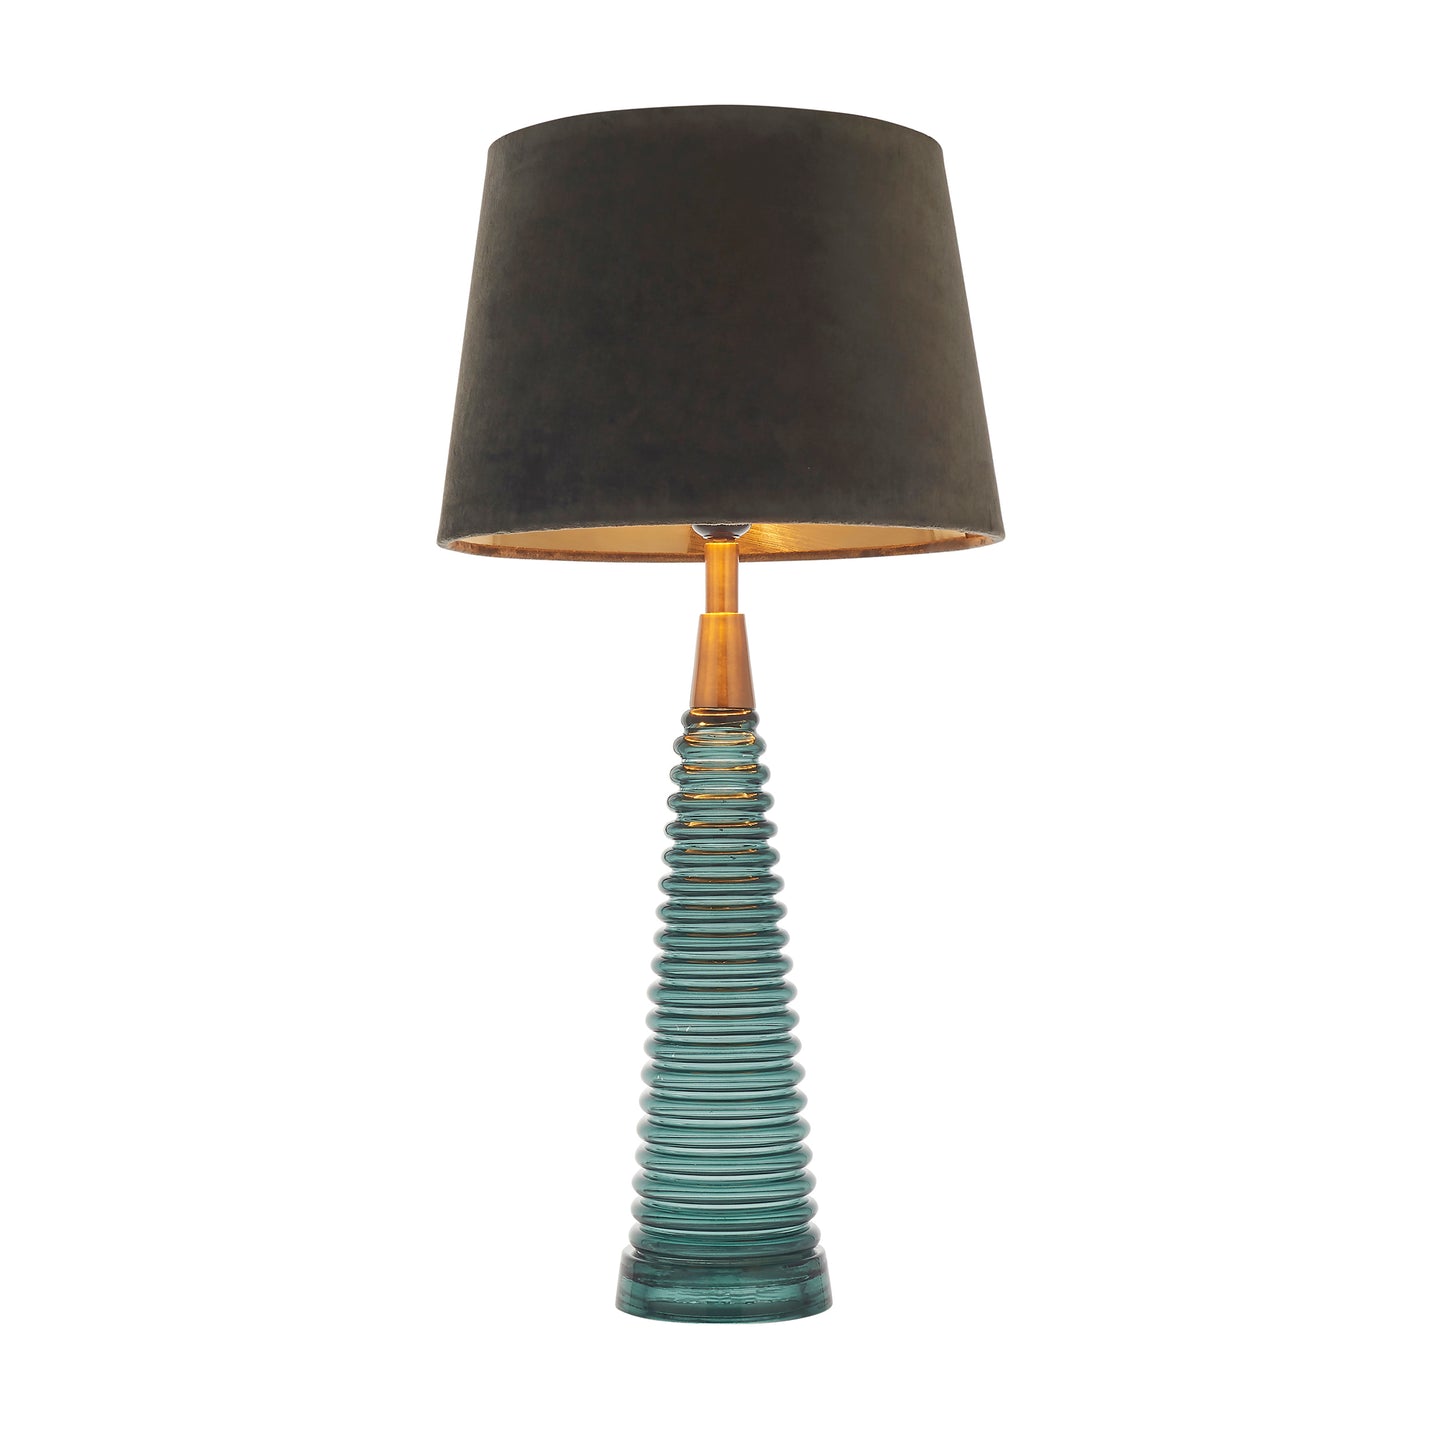 An interior decor table light with a teal glass & mocha base, available at Kikiathome.co.uk.